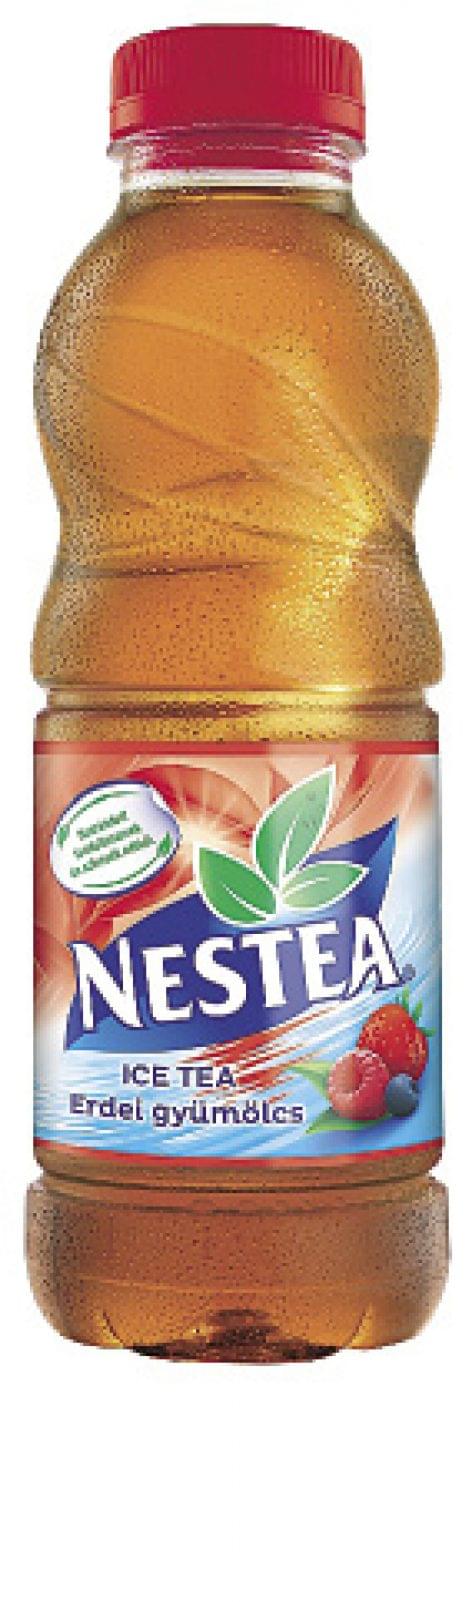 NESTEA welcomes spring with new flavours